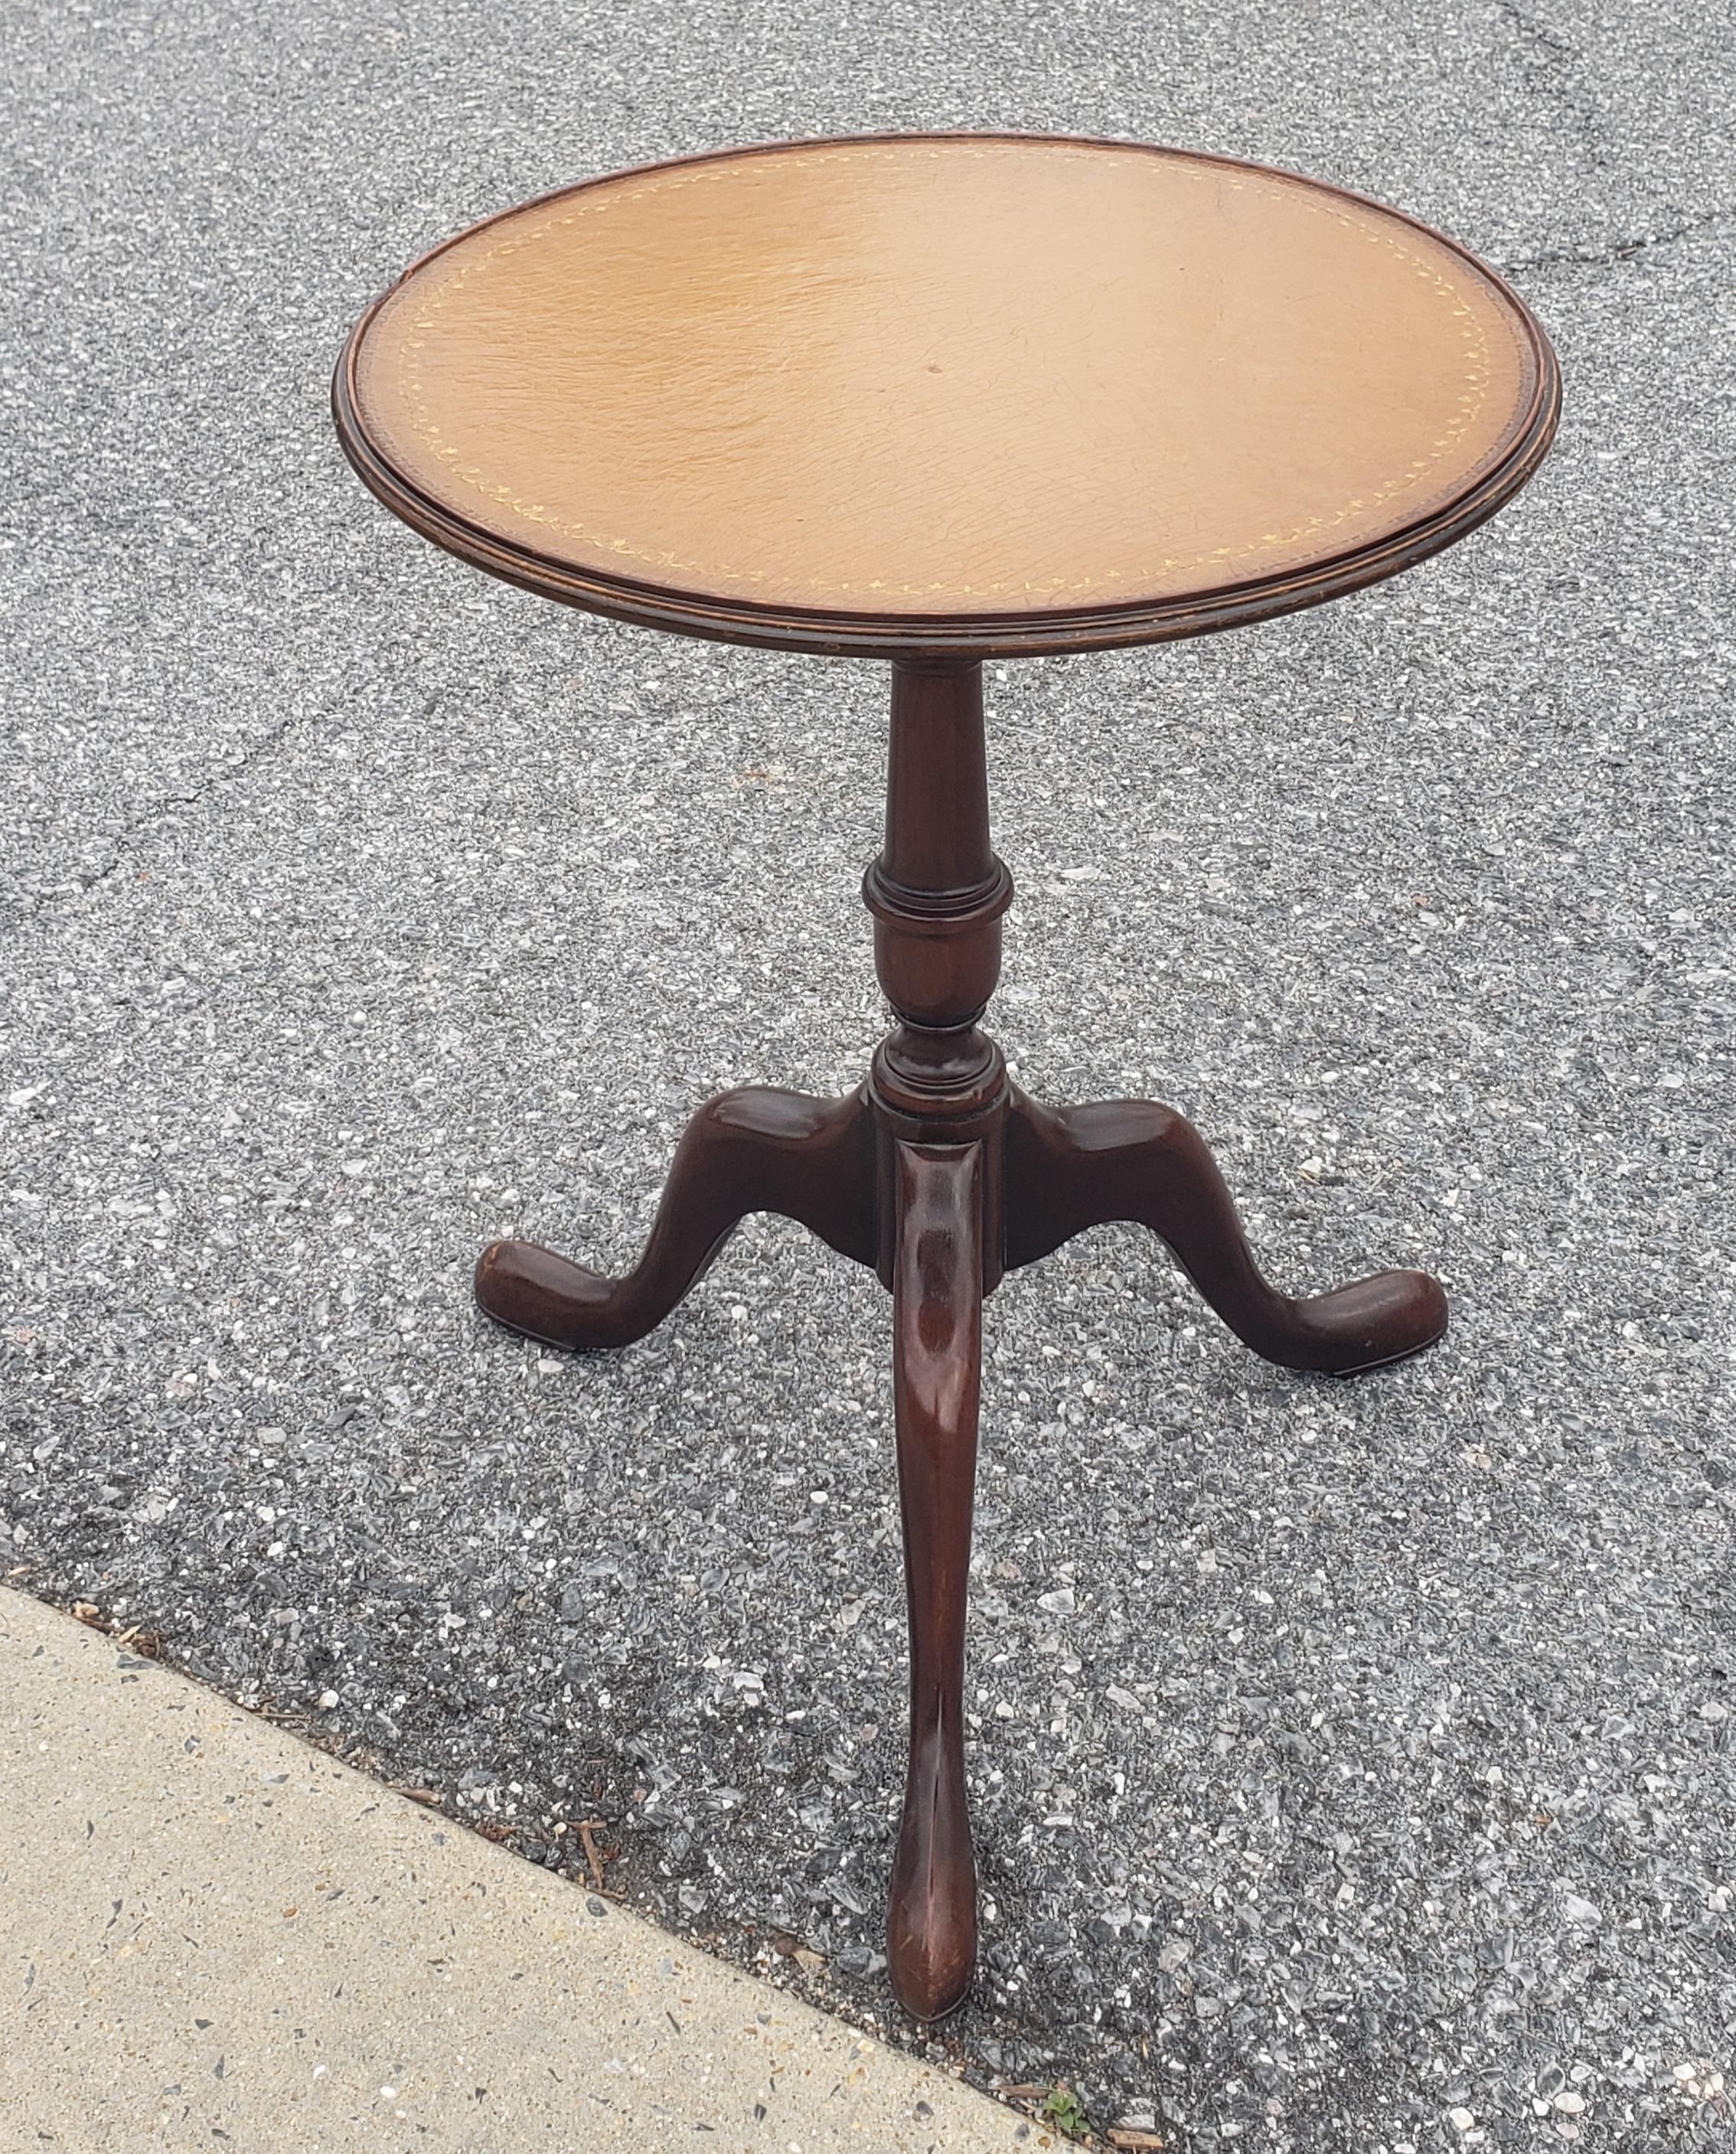 Baker furniture mahogany and tooled leather and stinciled top pedestal candle stand or side table with tripod snake feet. Measures 16